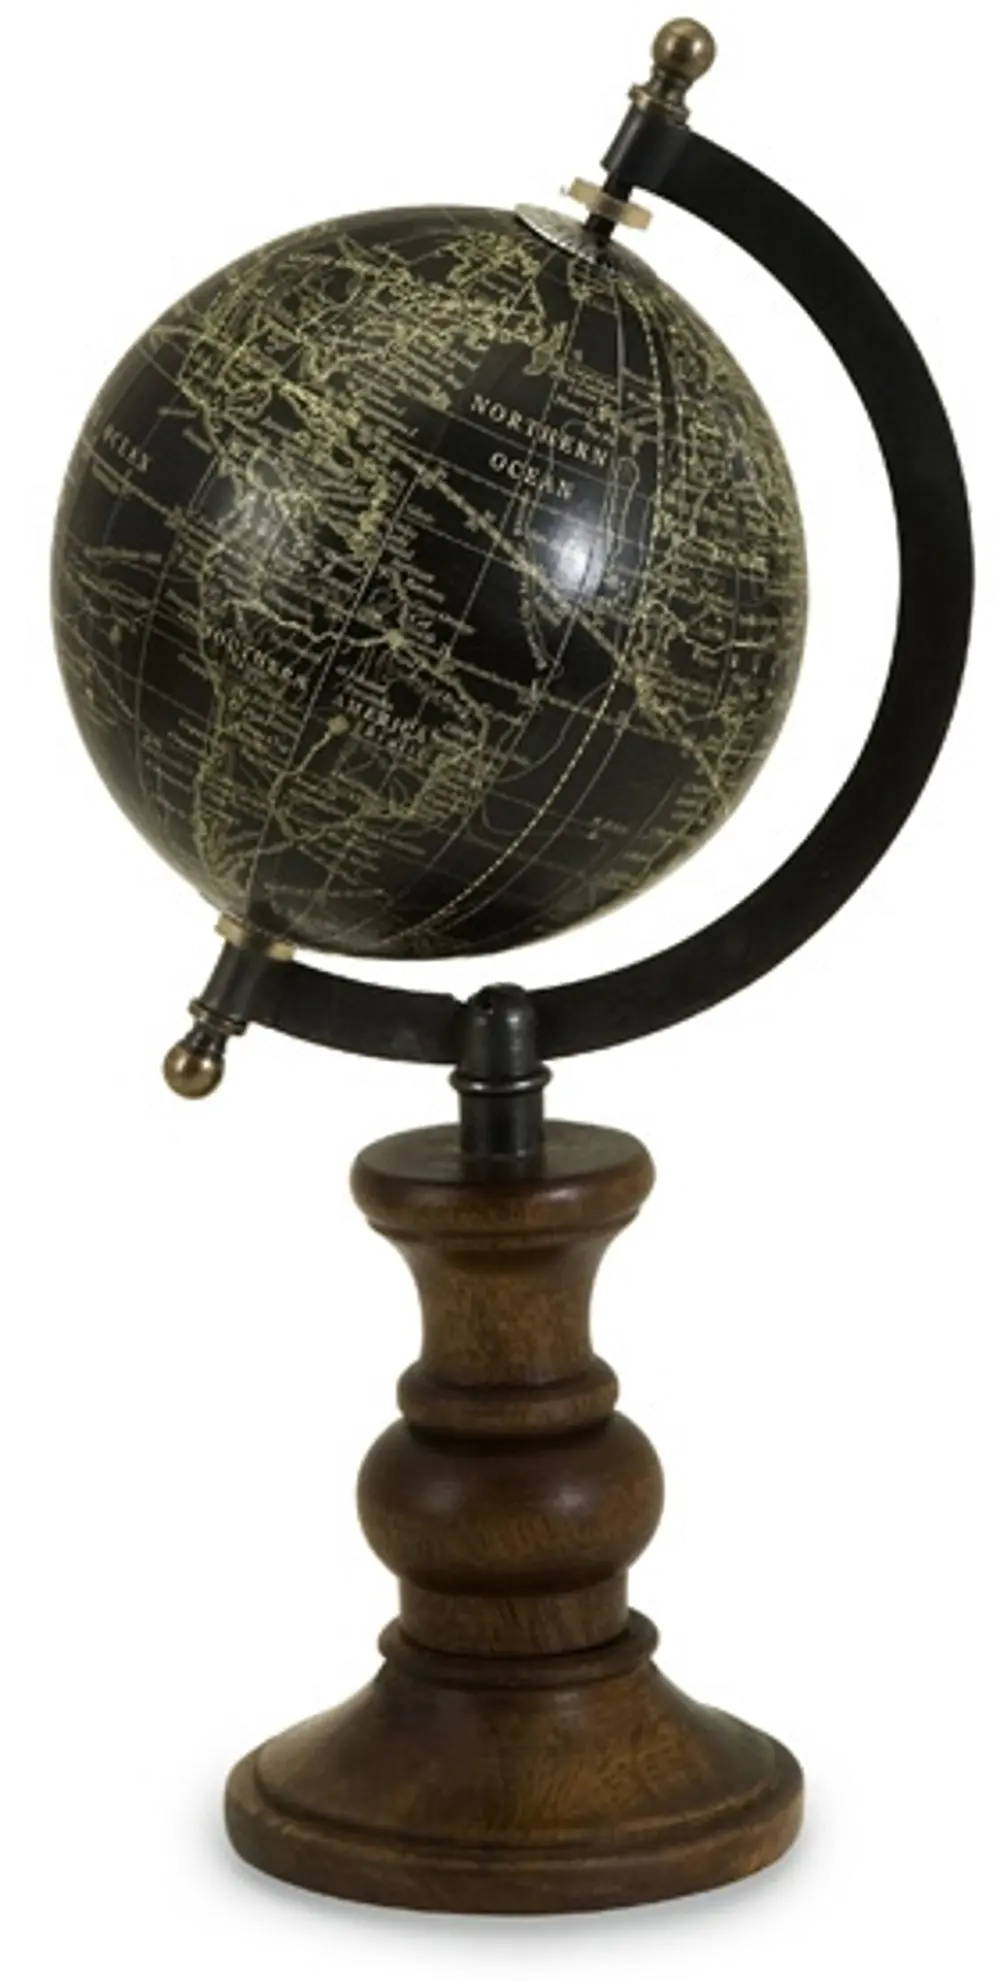 Chic Looking Moonlight Globe - Globes Collection-1